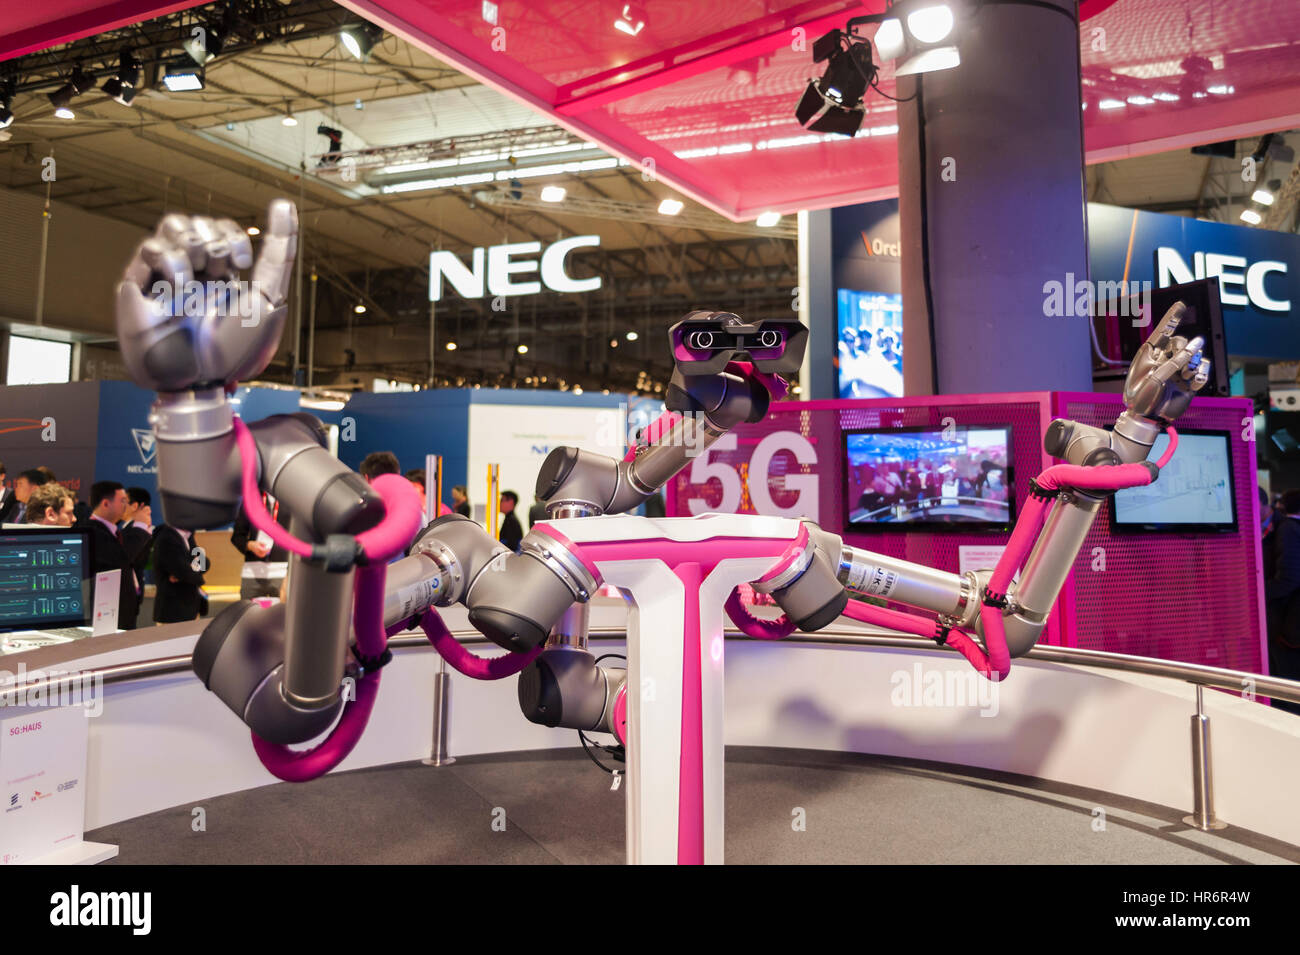 Barcelona, Spain. 27th Feb, 2017. A robot of the T-Systems operates during the Mobile World Congress wireless show in Barcelona. The annual Mobile World Congress hosts some of the world's largest communications companies, with many unveiling their latest phones and wearables gadgets. Credit: Charlie Perez/Alamy Live News Stock Photo